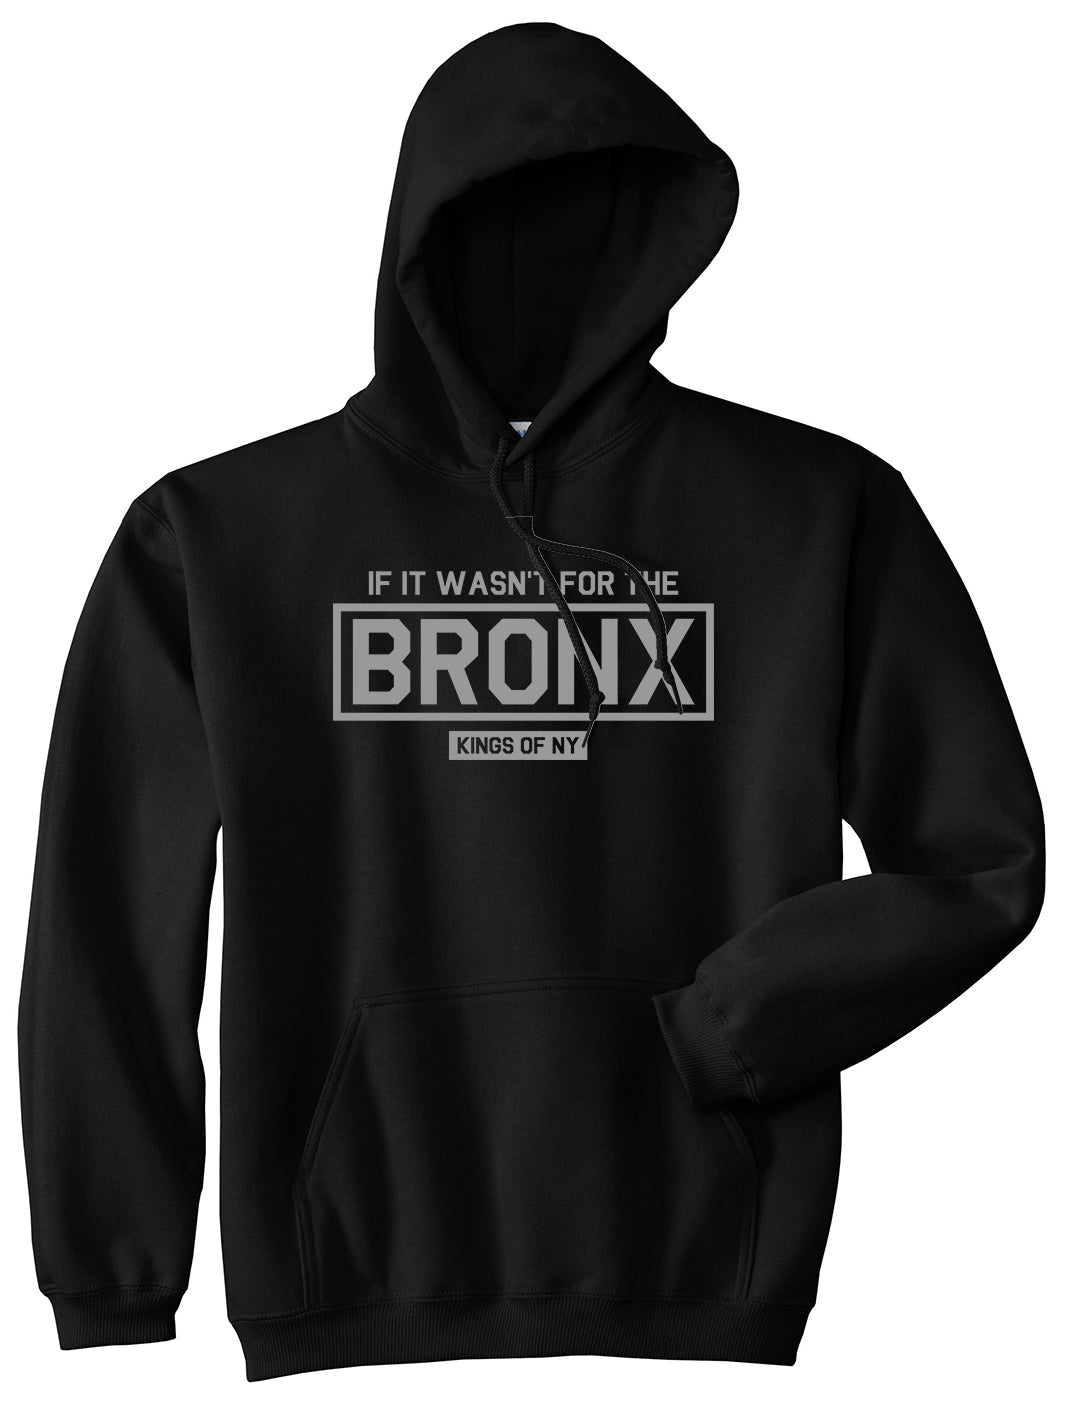 If It Wasnt For The Bronx Mens Pullover Hoodie Black by Kings Of NY